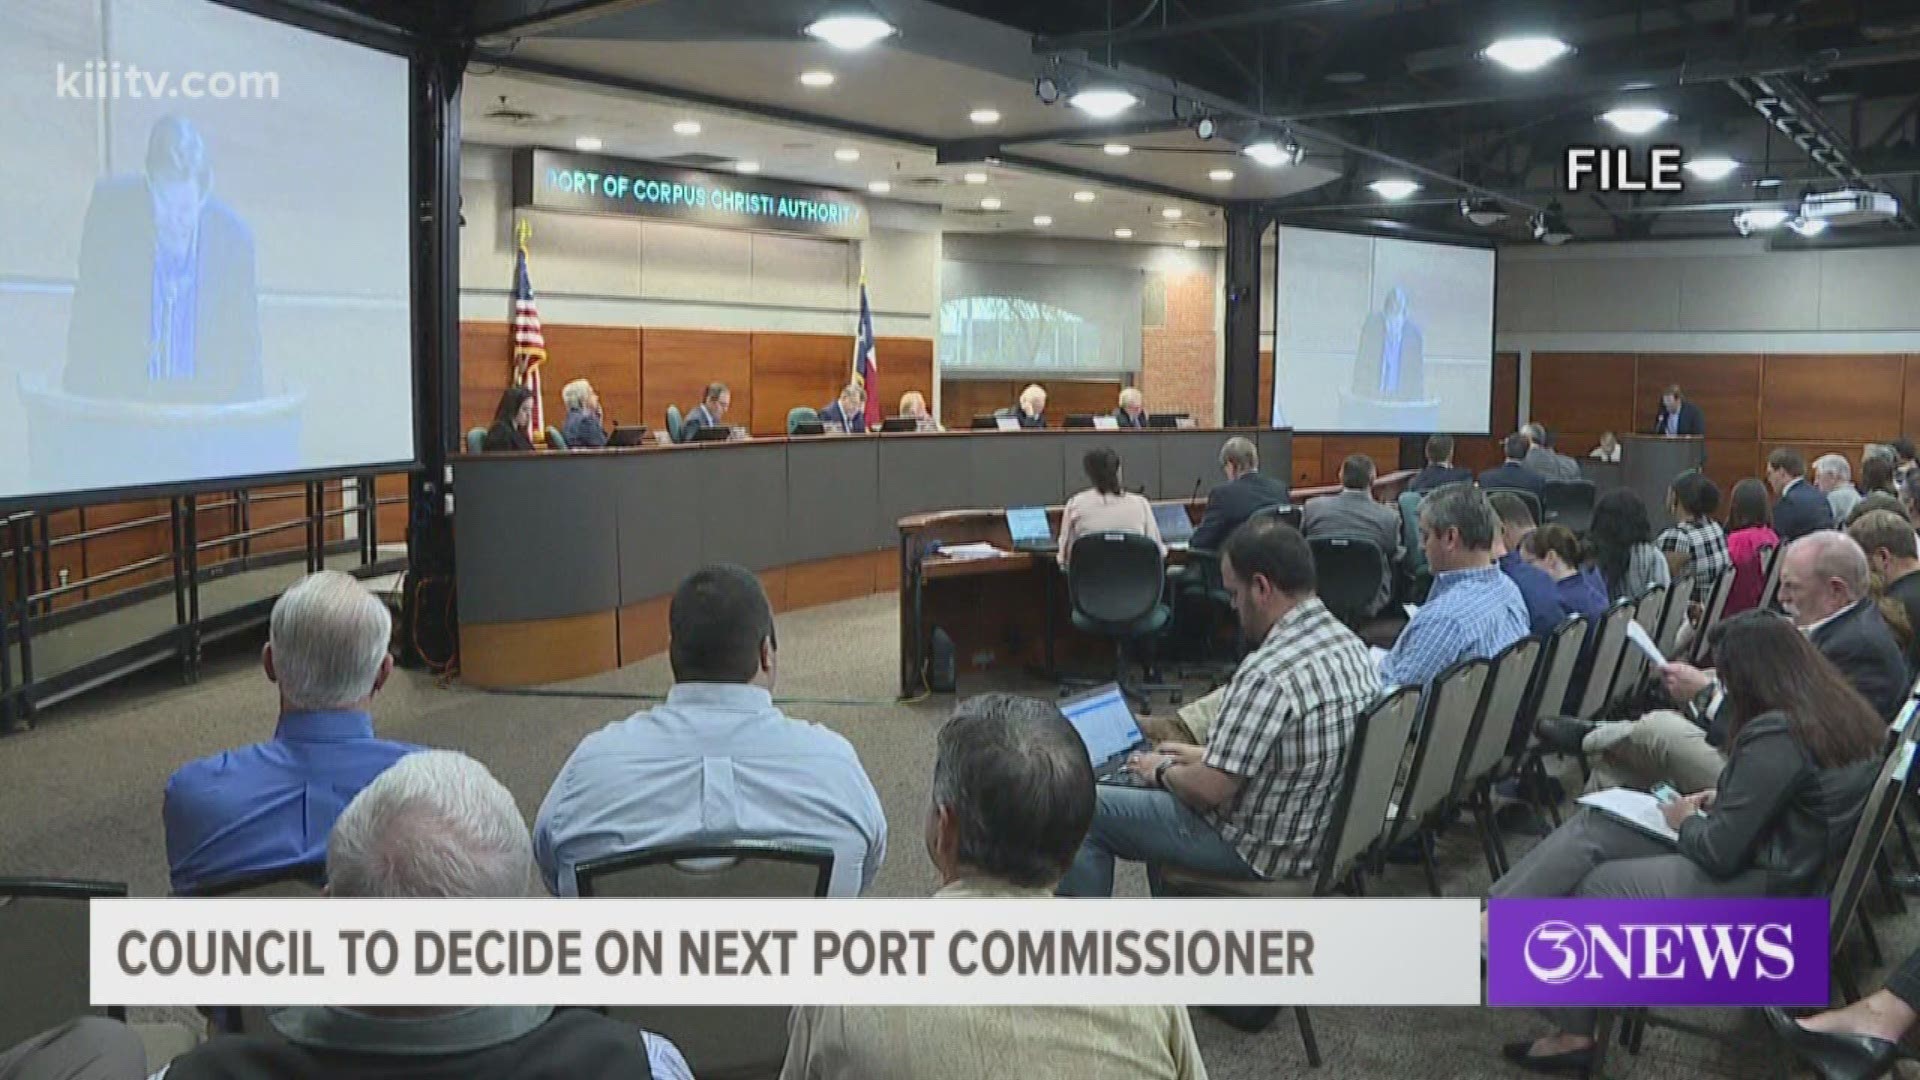 Following the sudden resignation of port commissioner Wayne Squires in December,  Corpus Christi City Council is now deciding who will fill the seat.